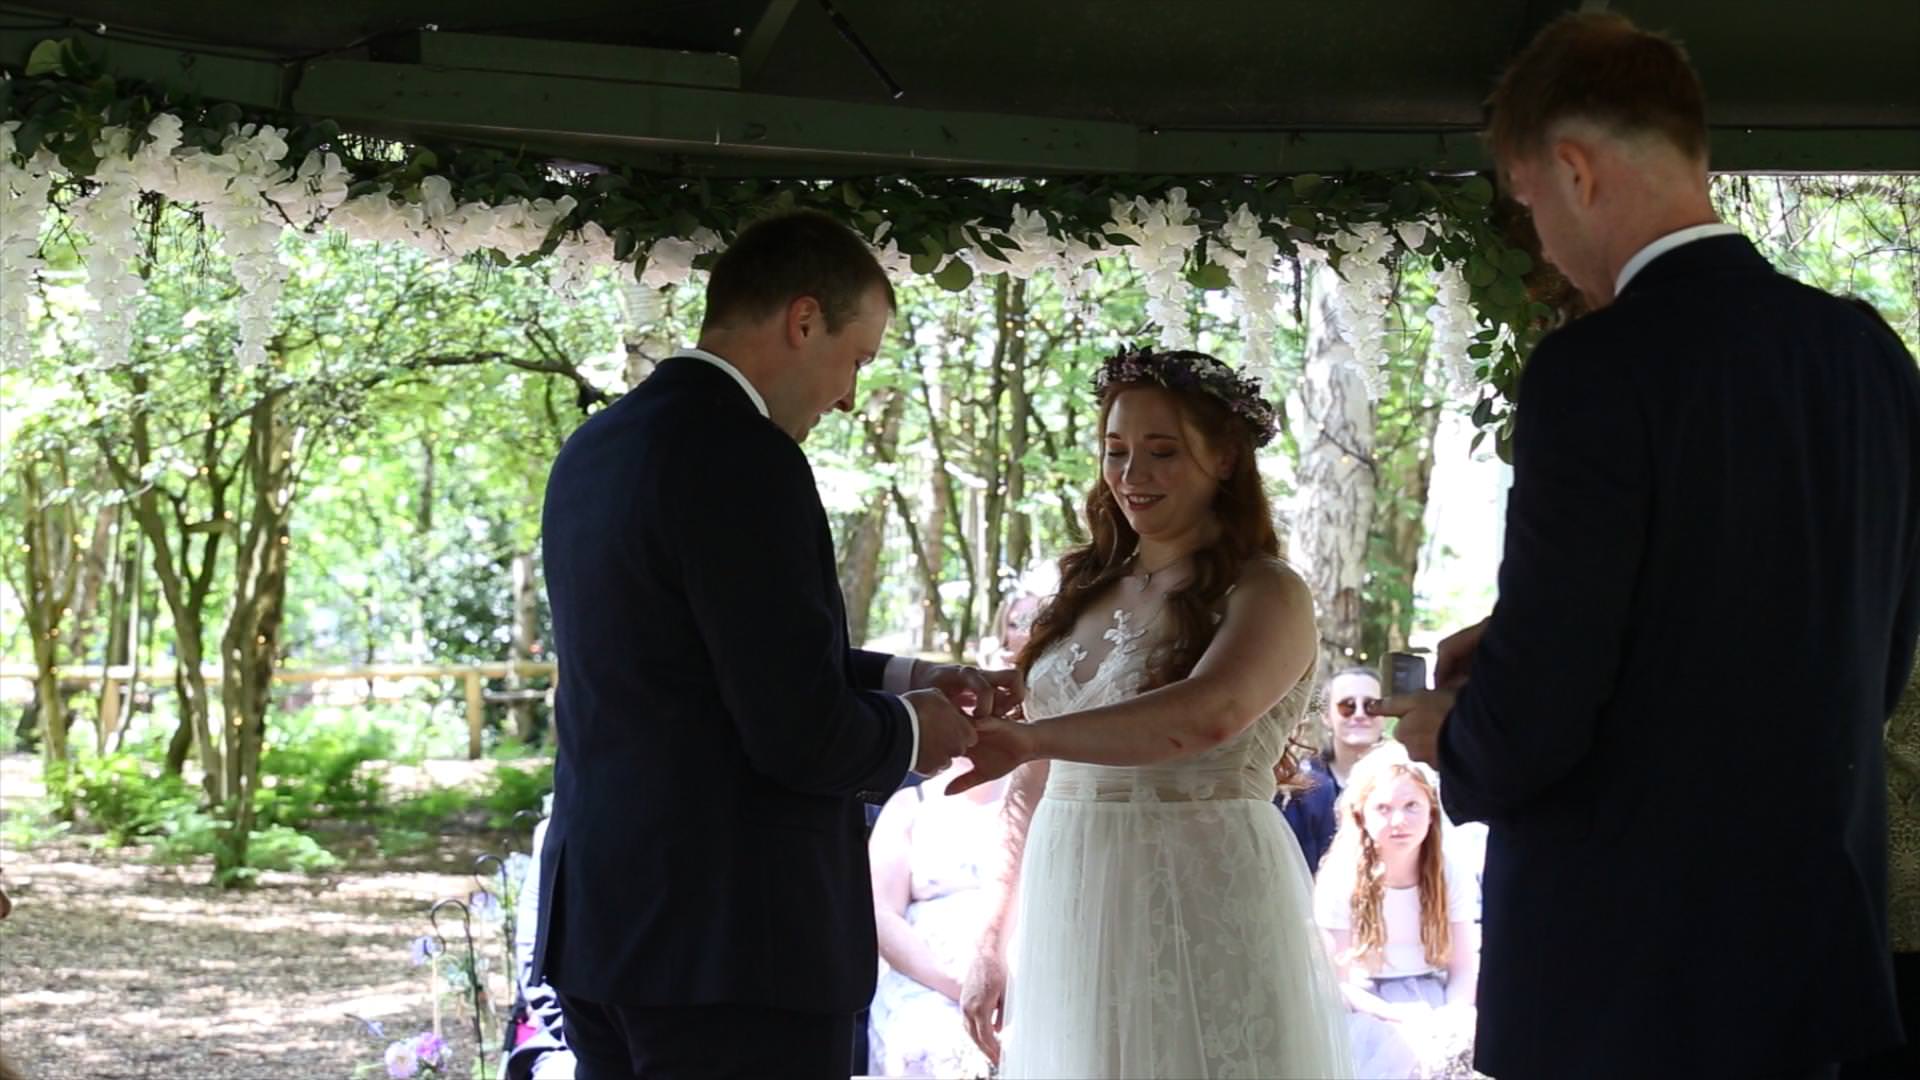 videographer captures wedding rings at outdoor cheshire woodland wedding